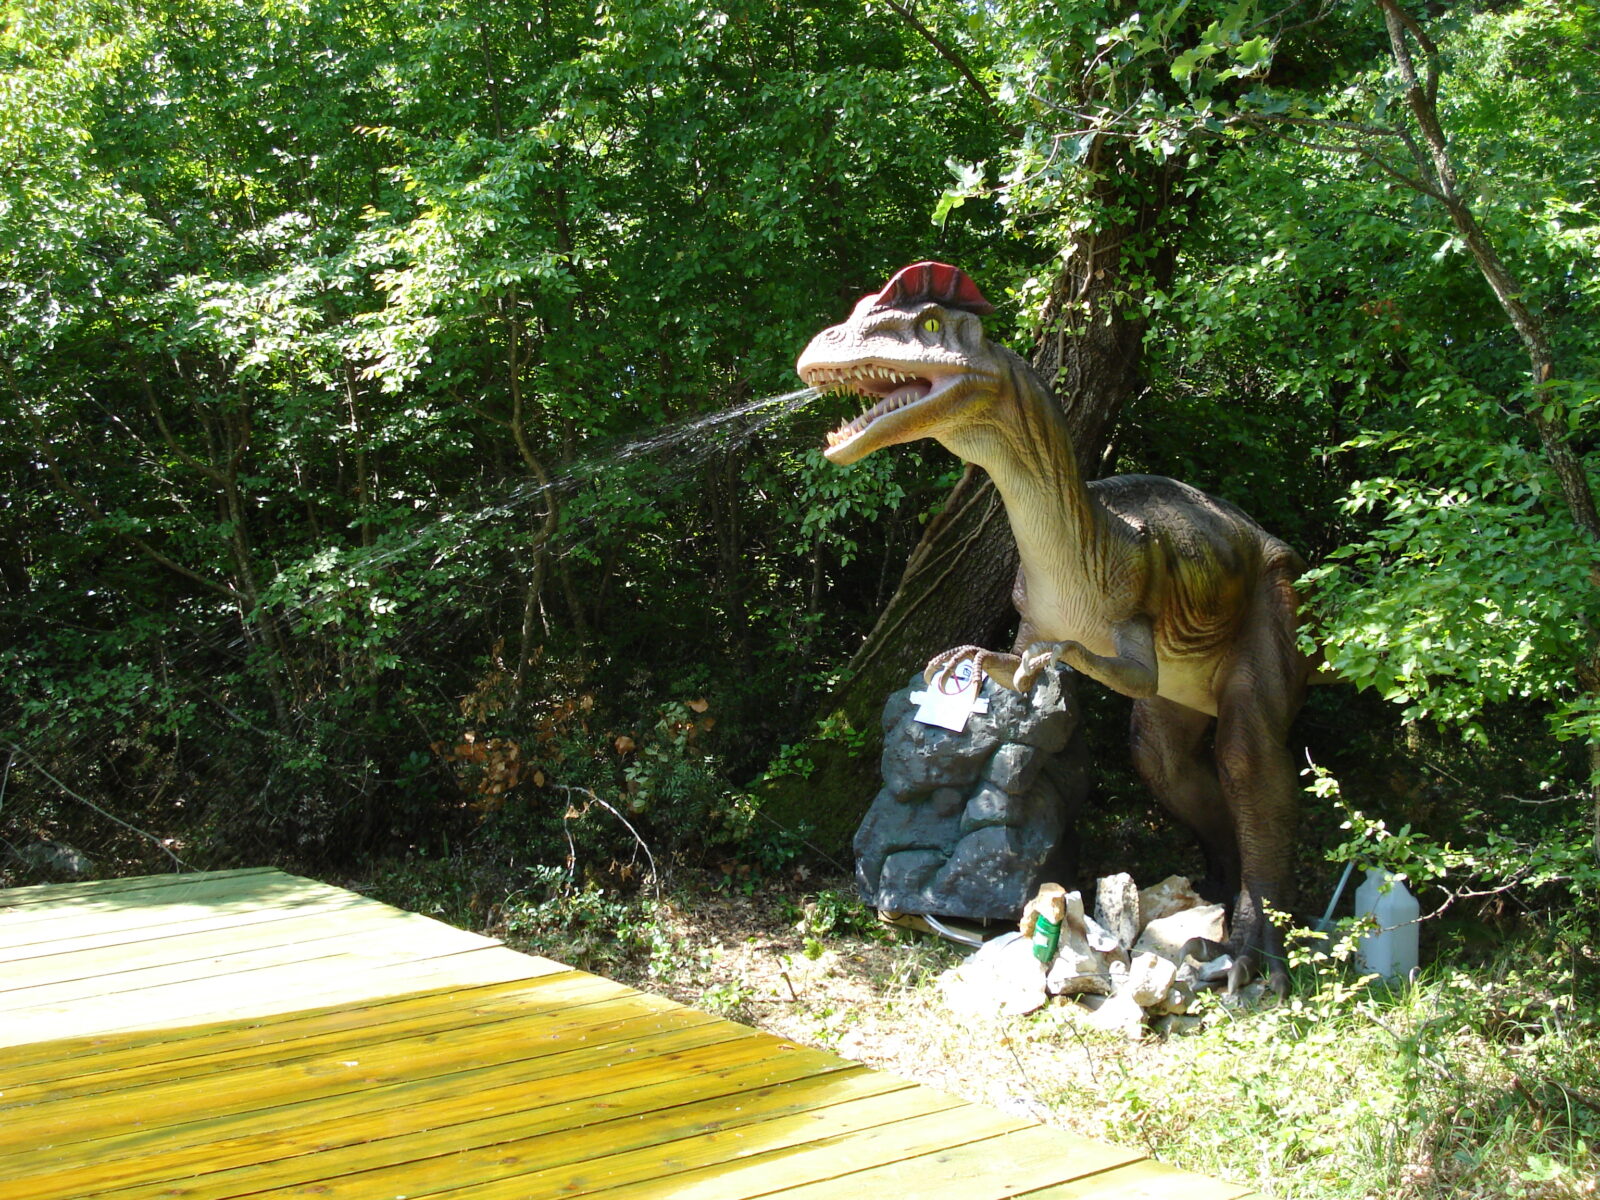 Life-size animatronic dinosaurs have taken over the Peak District this weekend, The Manc